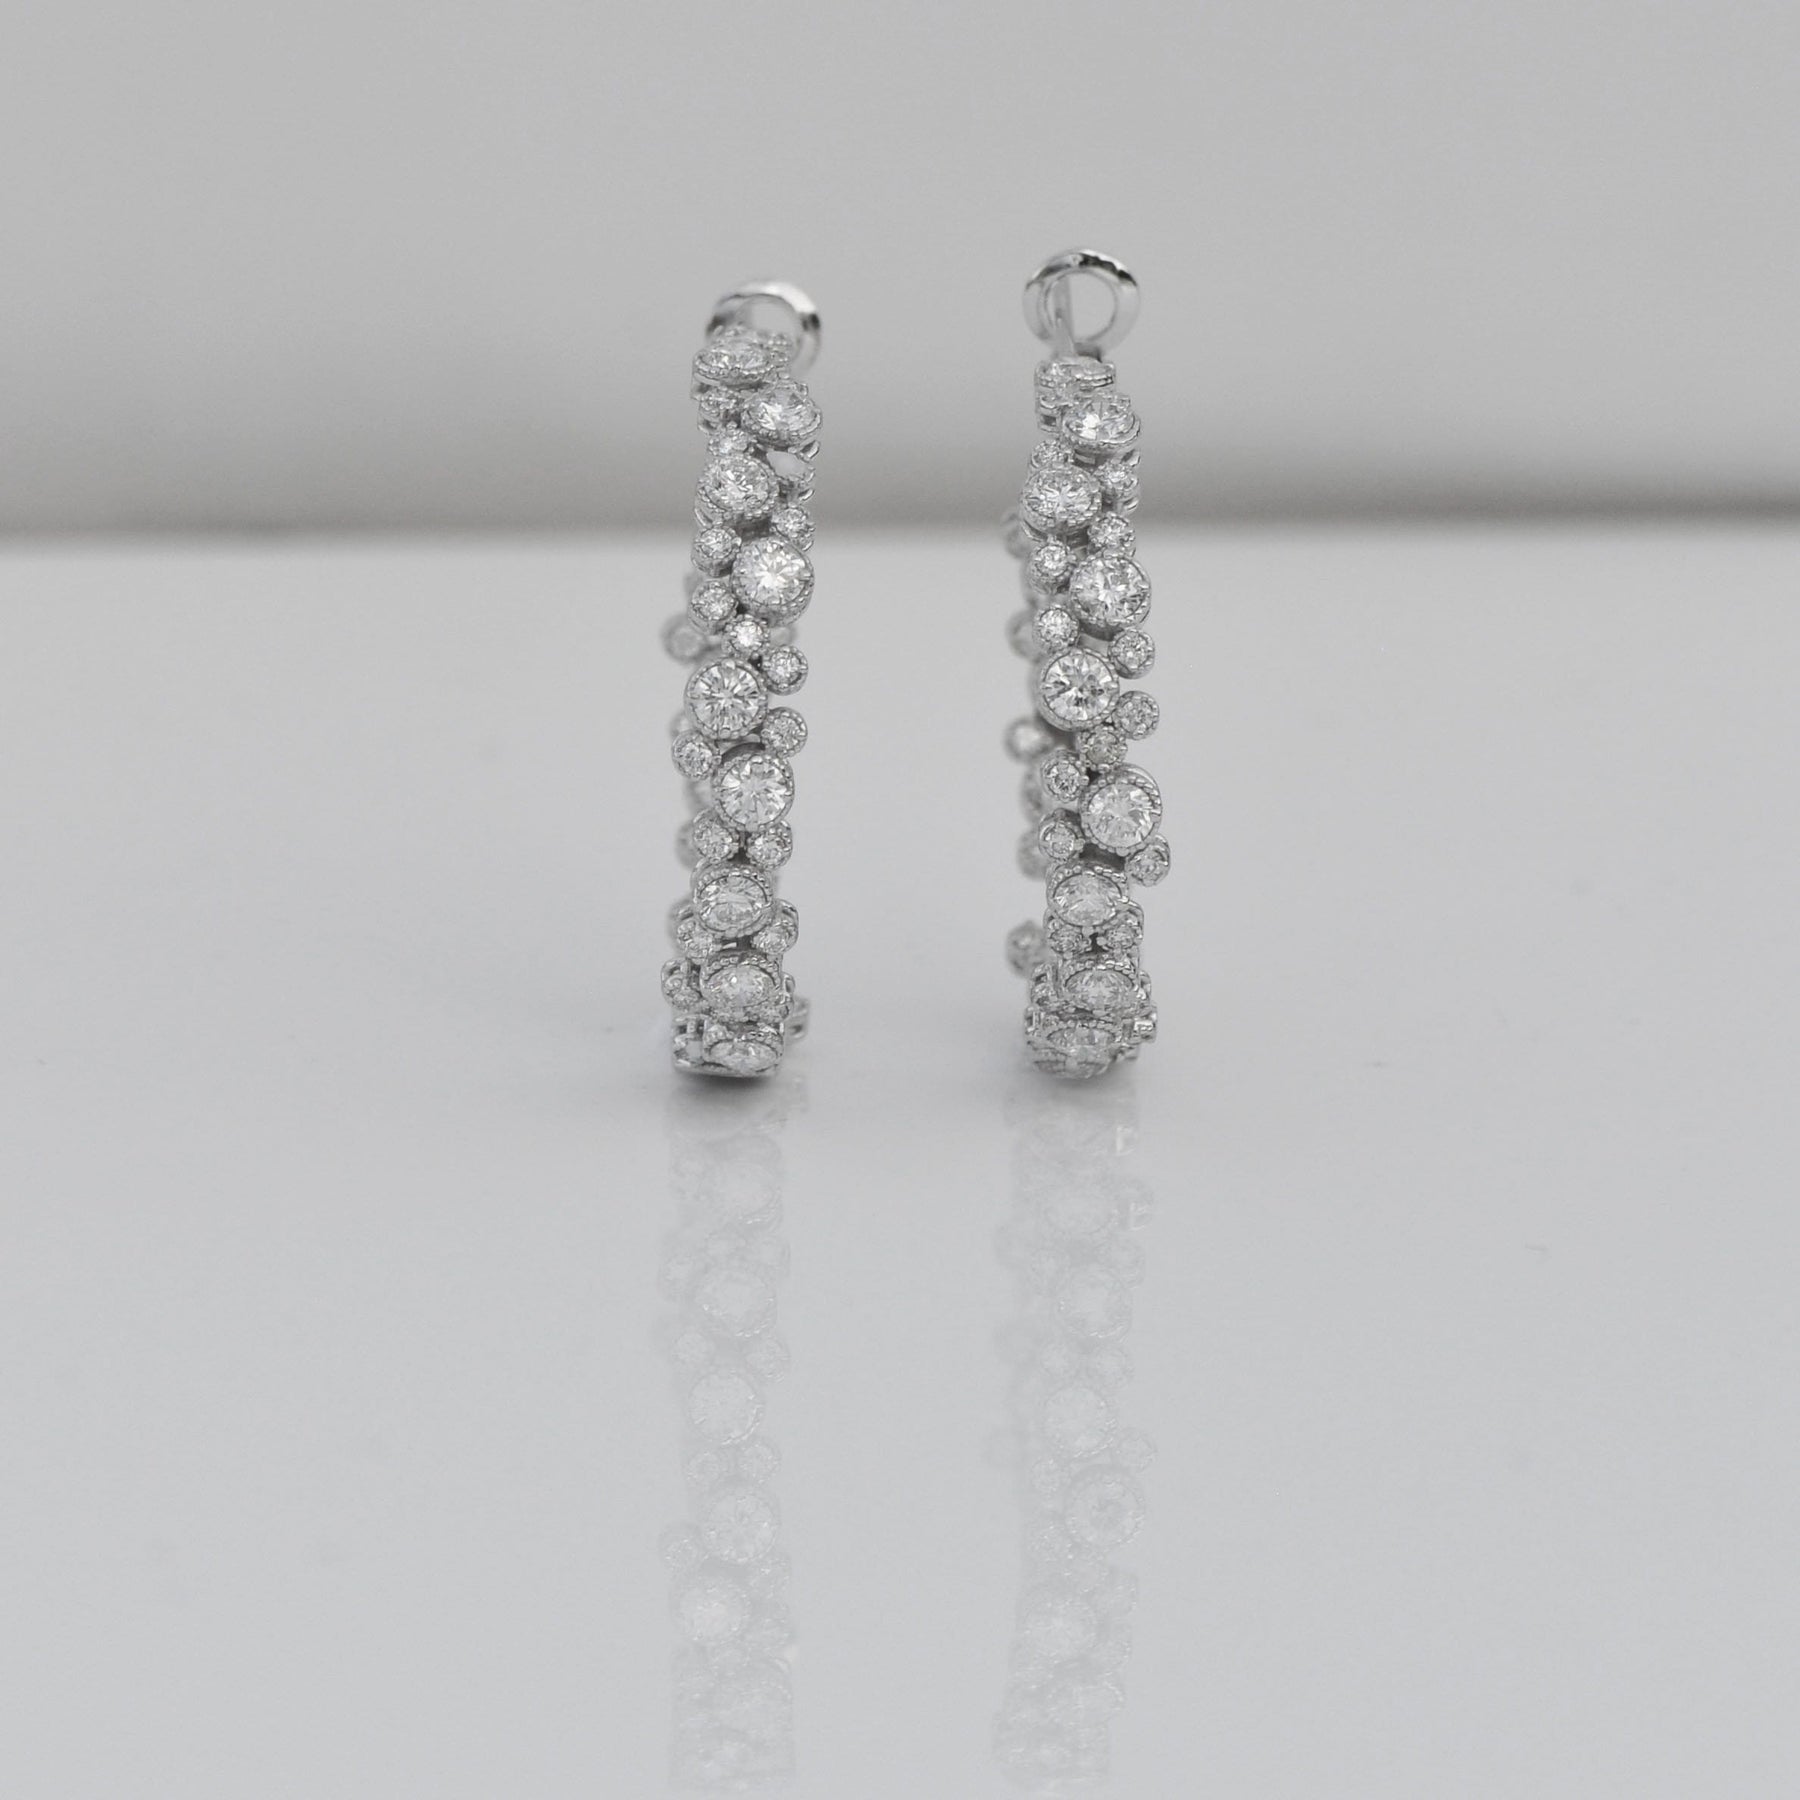 DIAMOND EARRINGS - CHRONICLE - Chris Aire Fine Jewelry & Timepieces